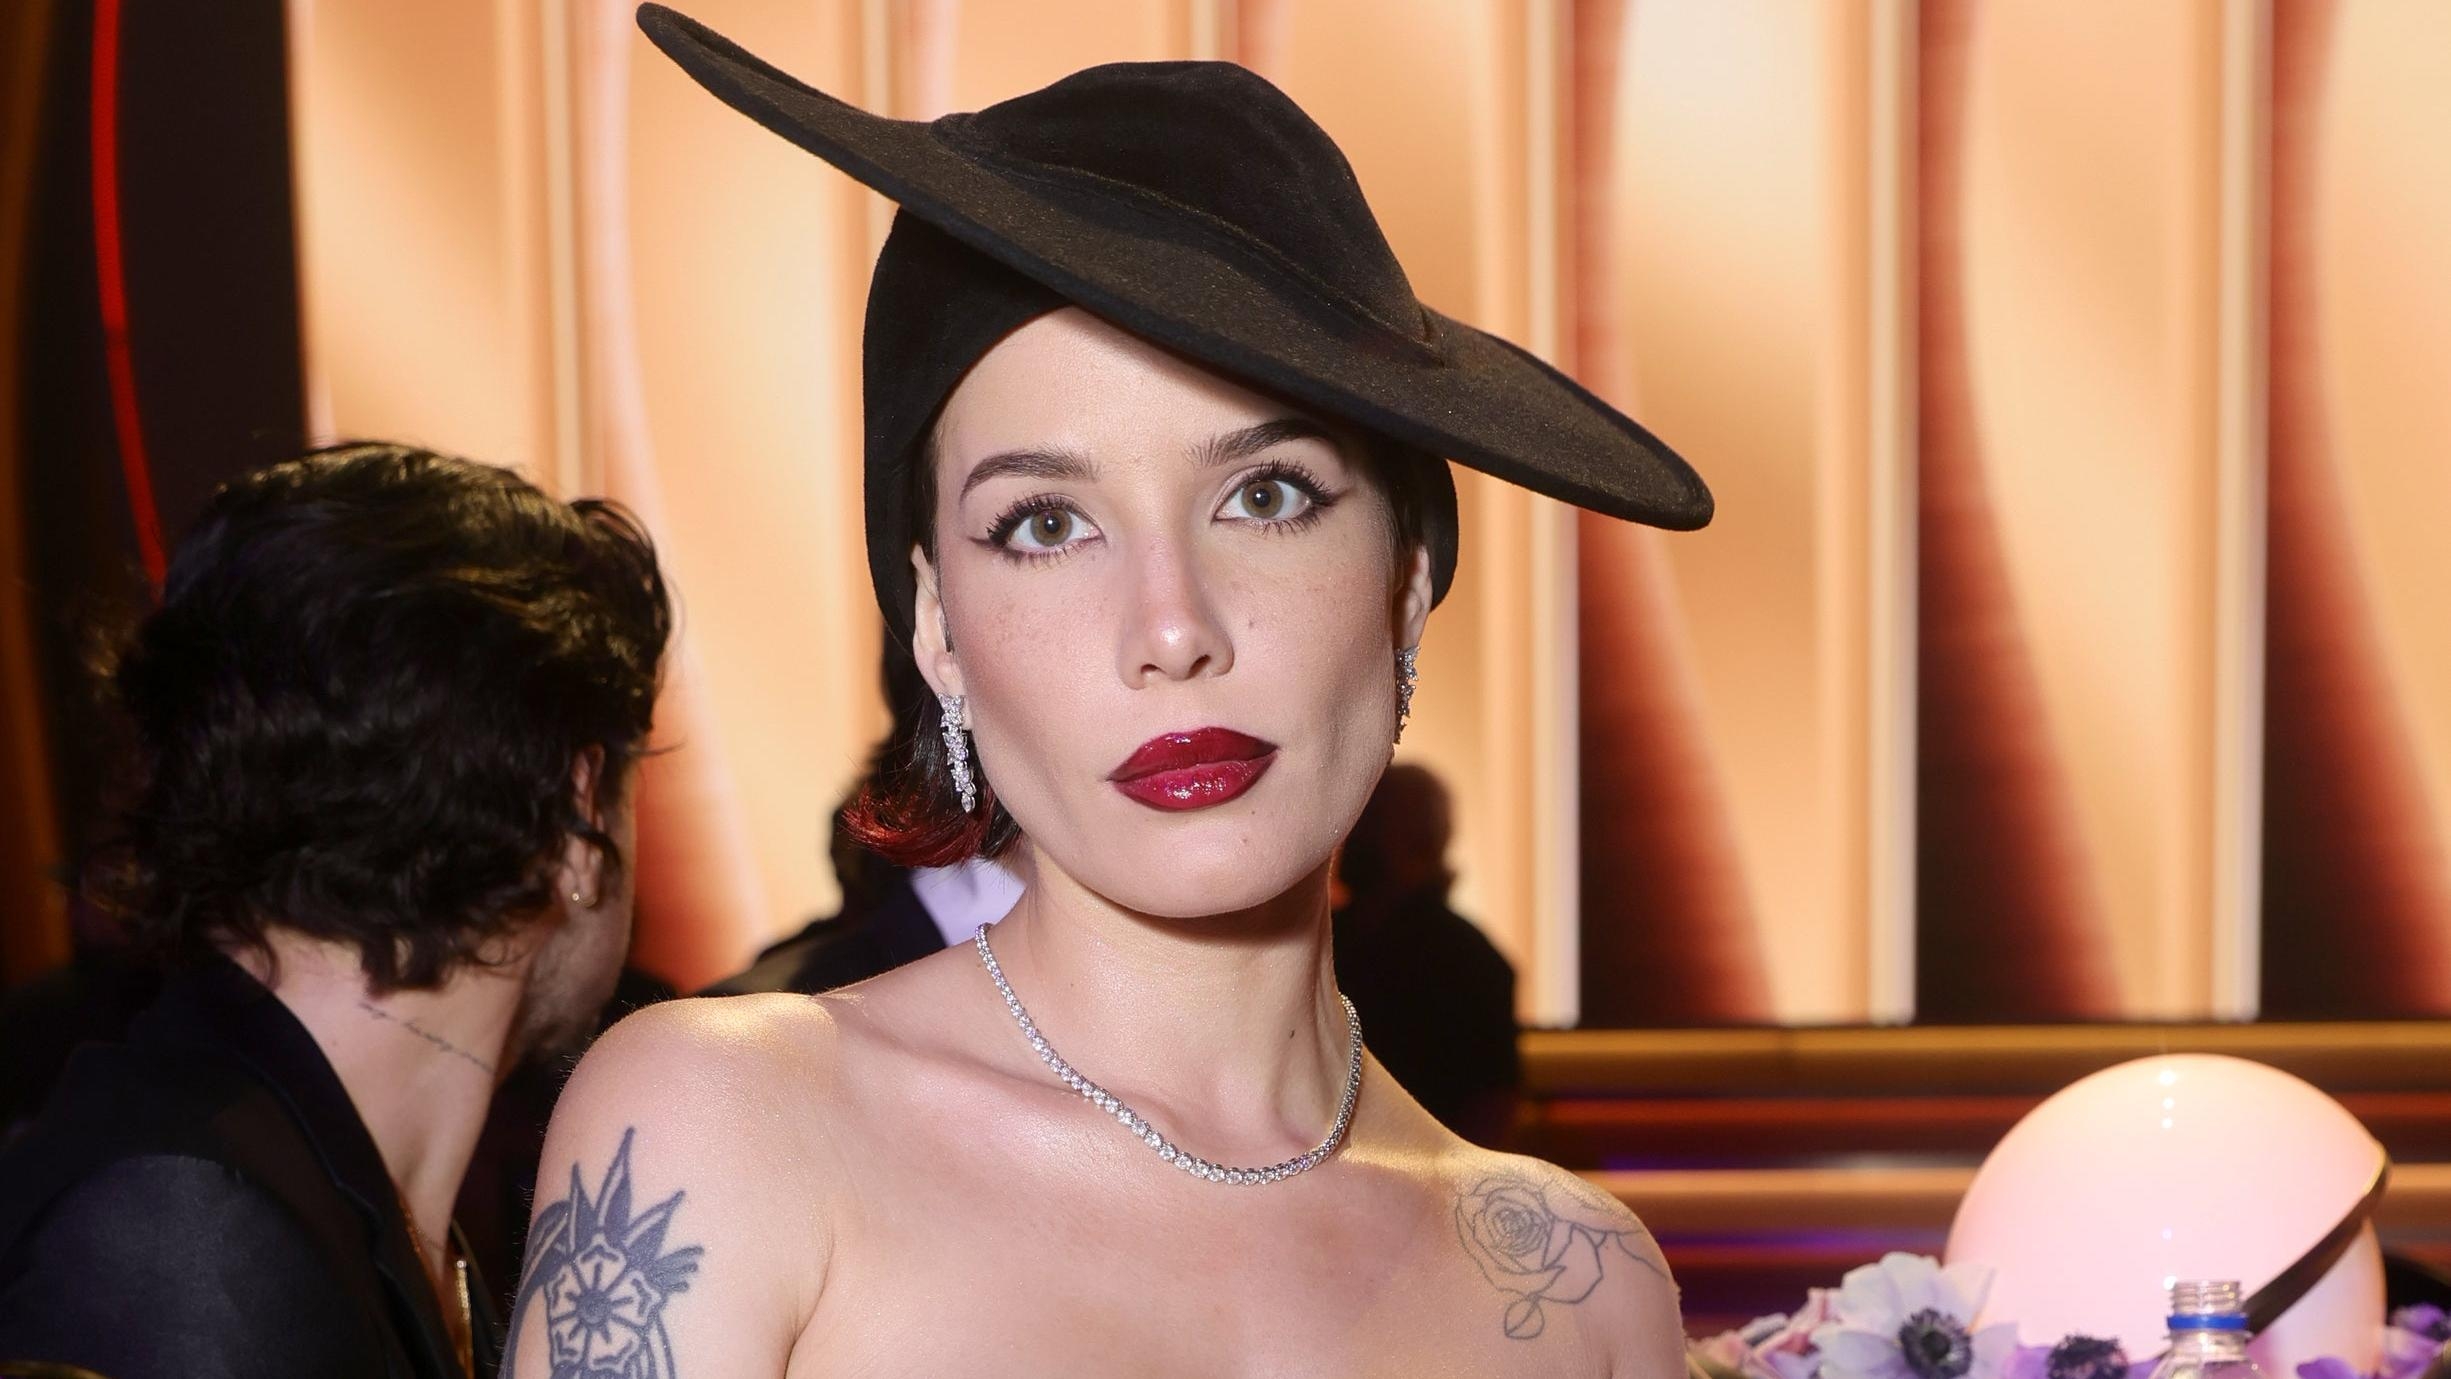 Halsey goes viral on TikTok with claim her label won’t release single until she goes viral on TikTok